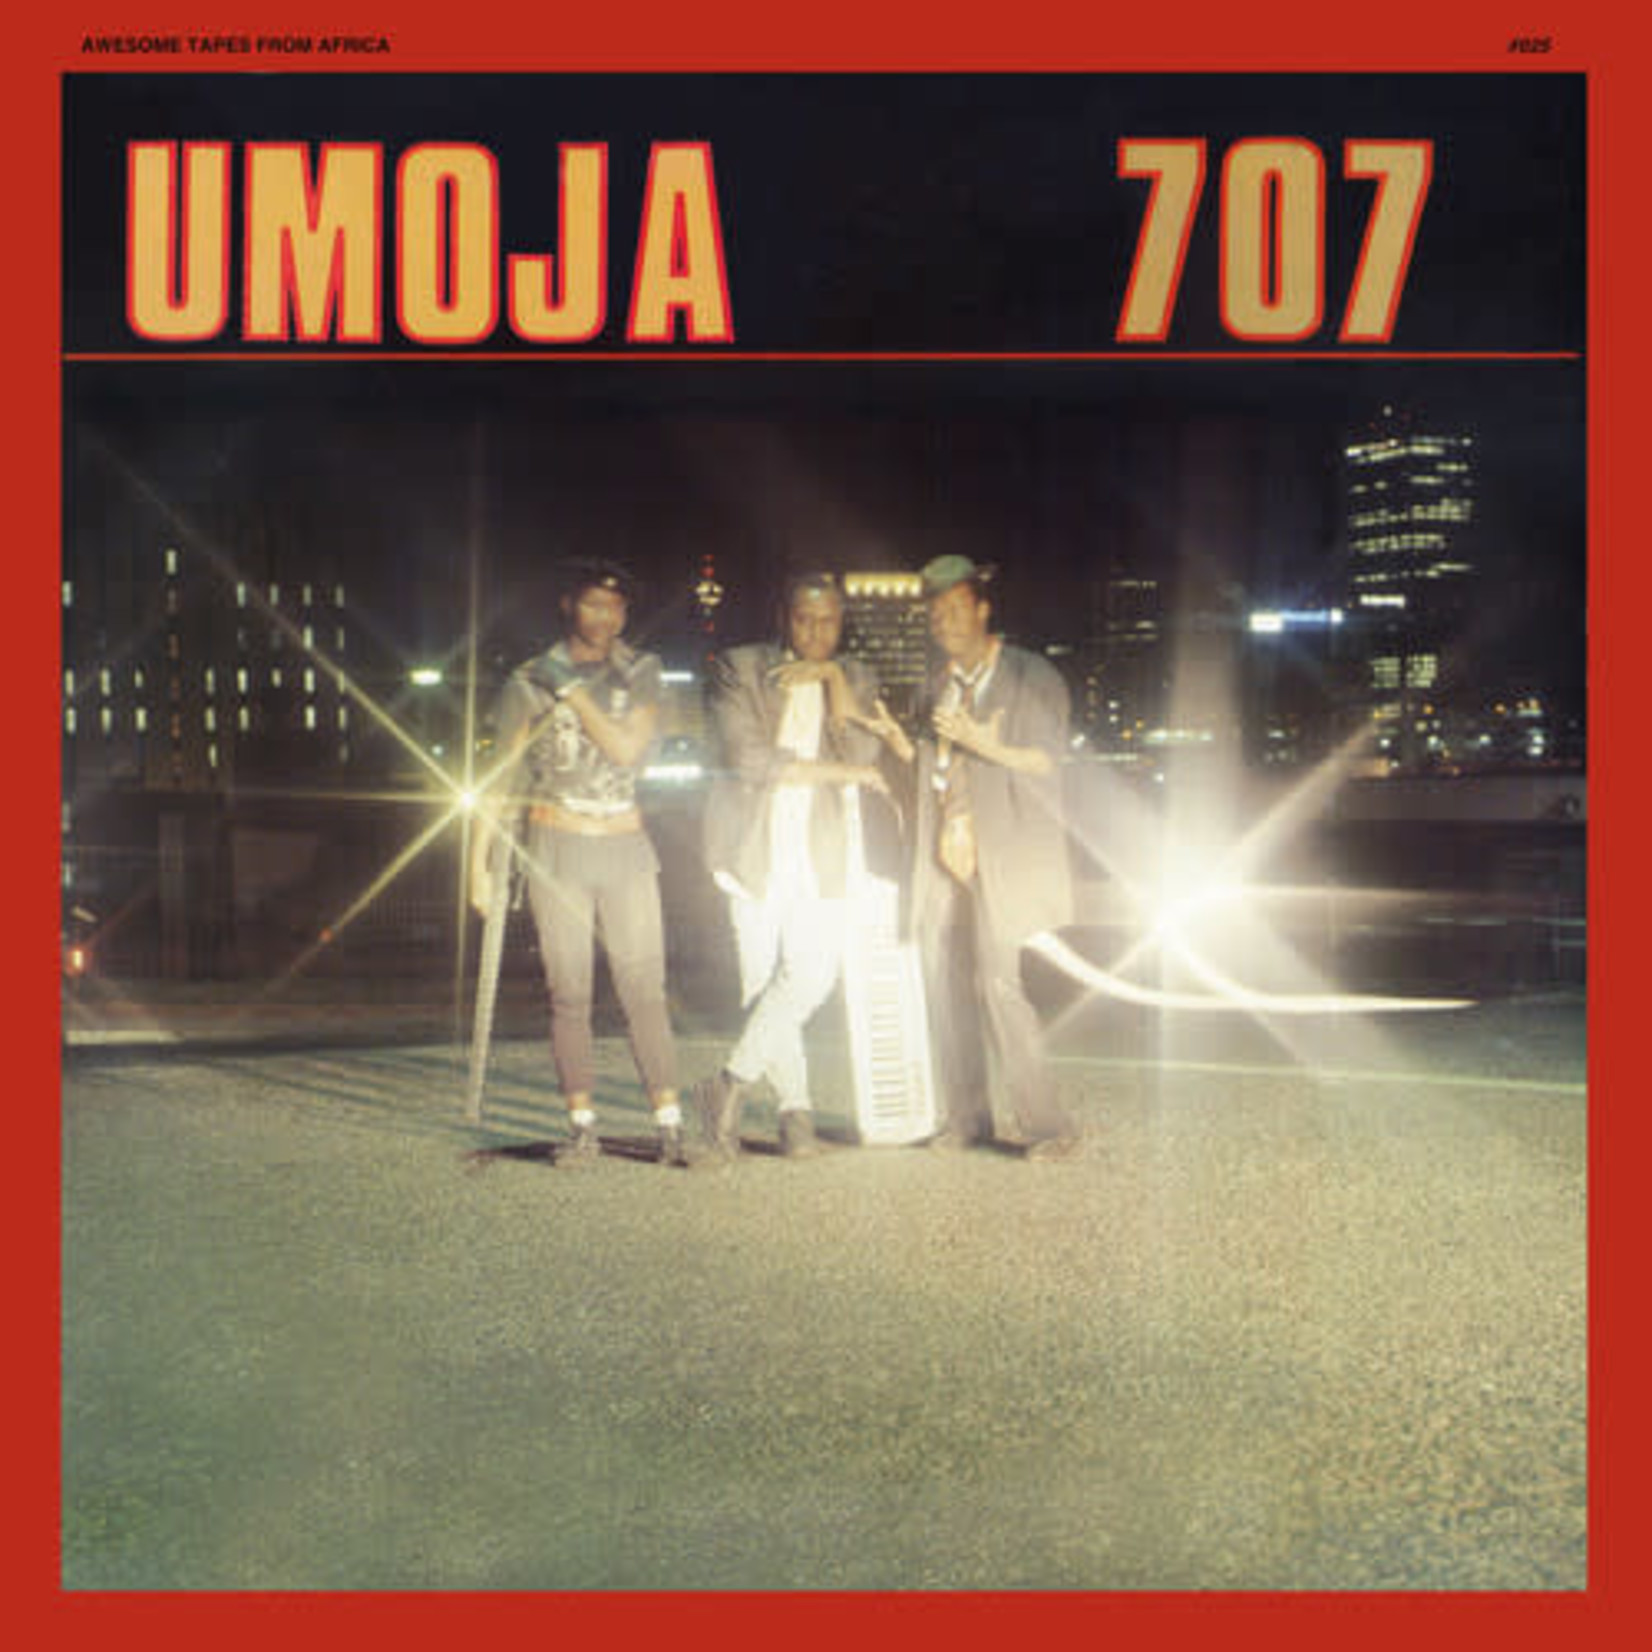 Awesome Tapes From Africa Umoja - 707 (LP) [45RPM]